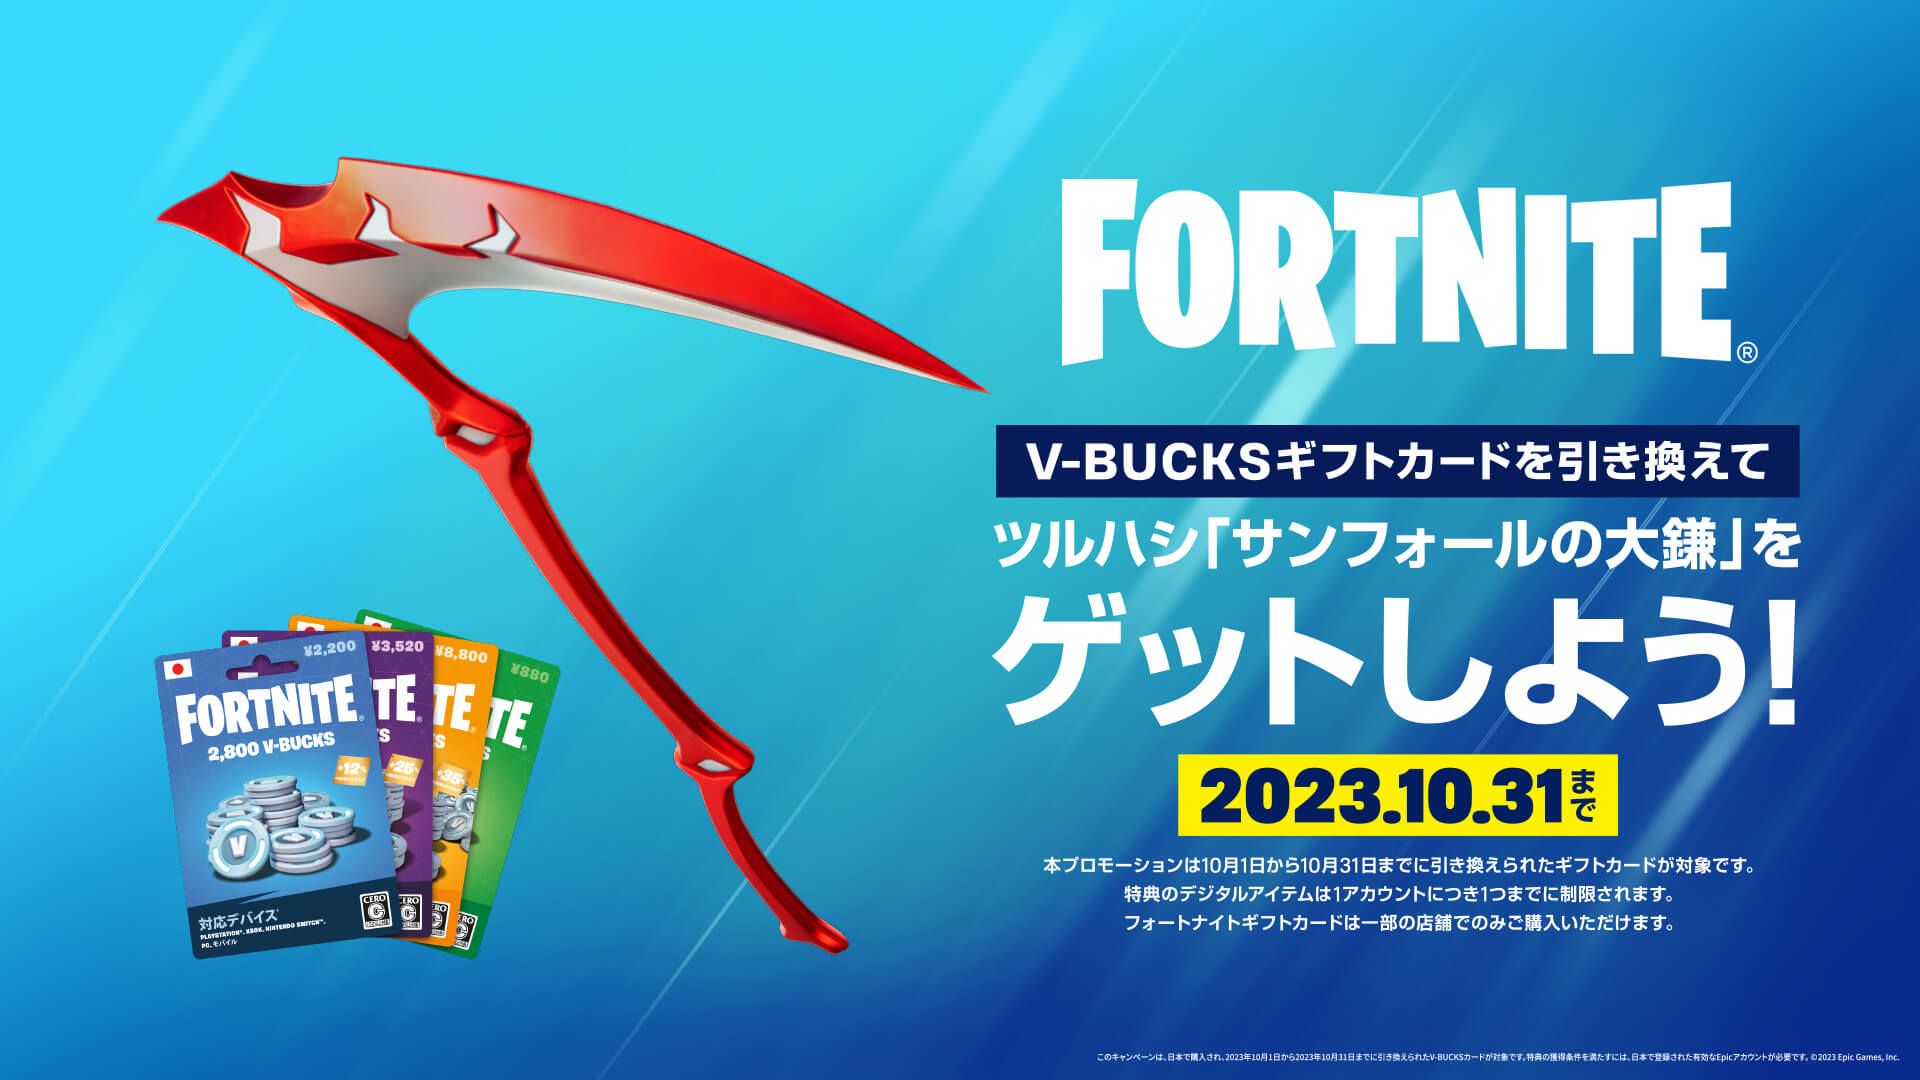 Fortnite's new V-Bucks prices: what they cost and how to get them